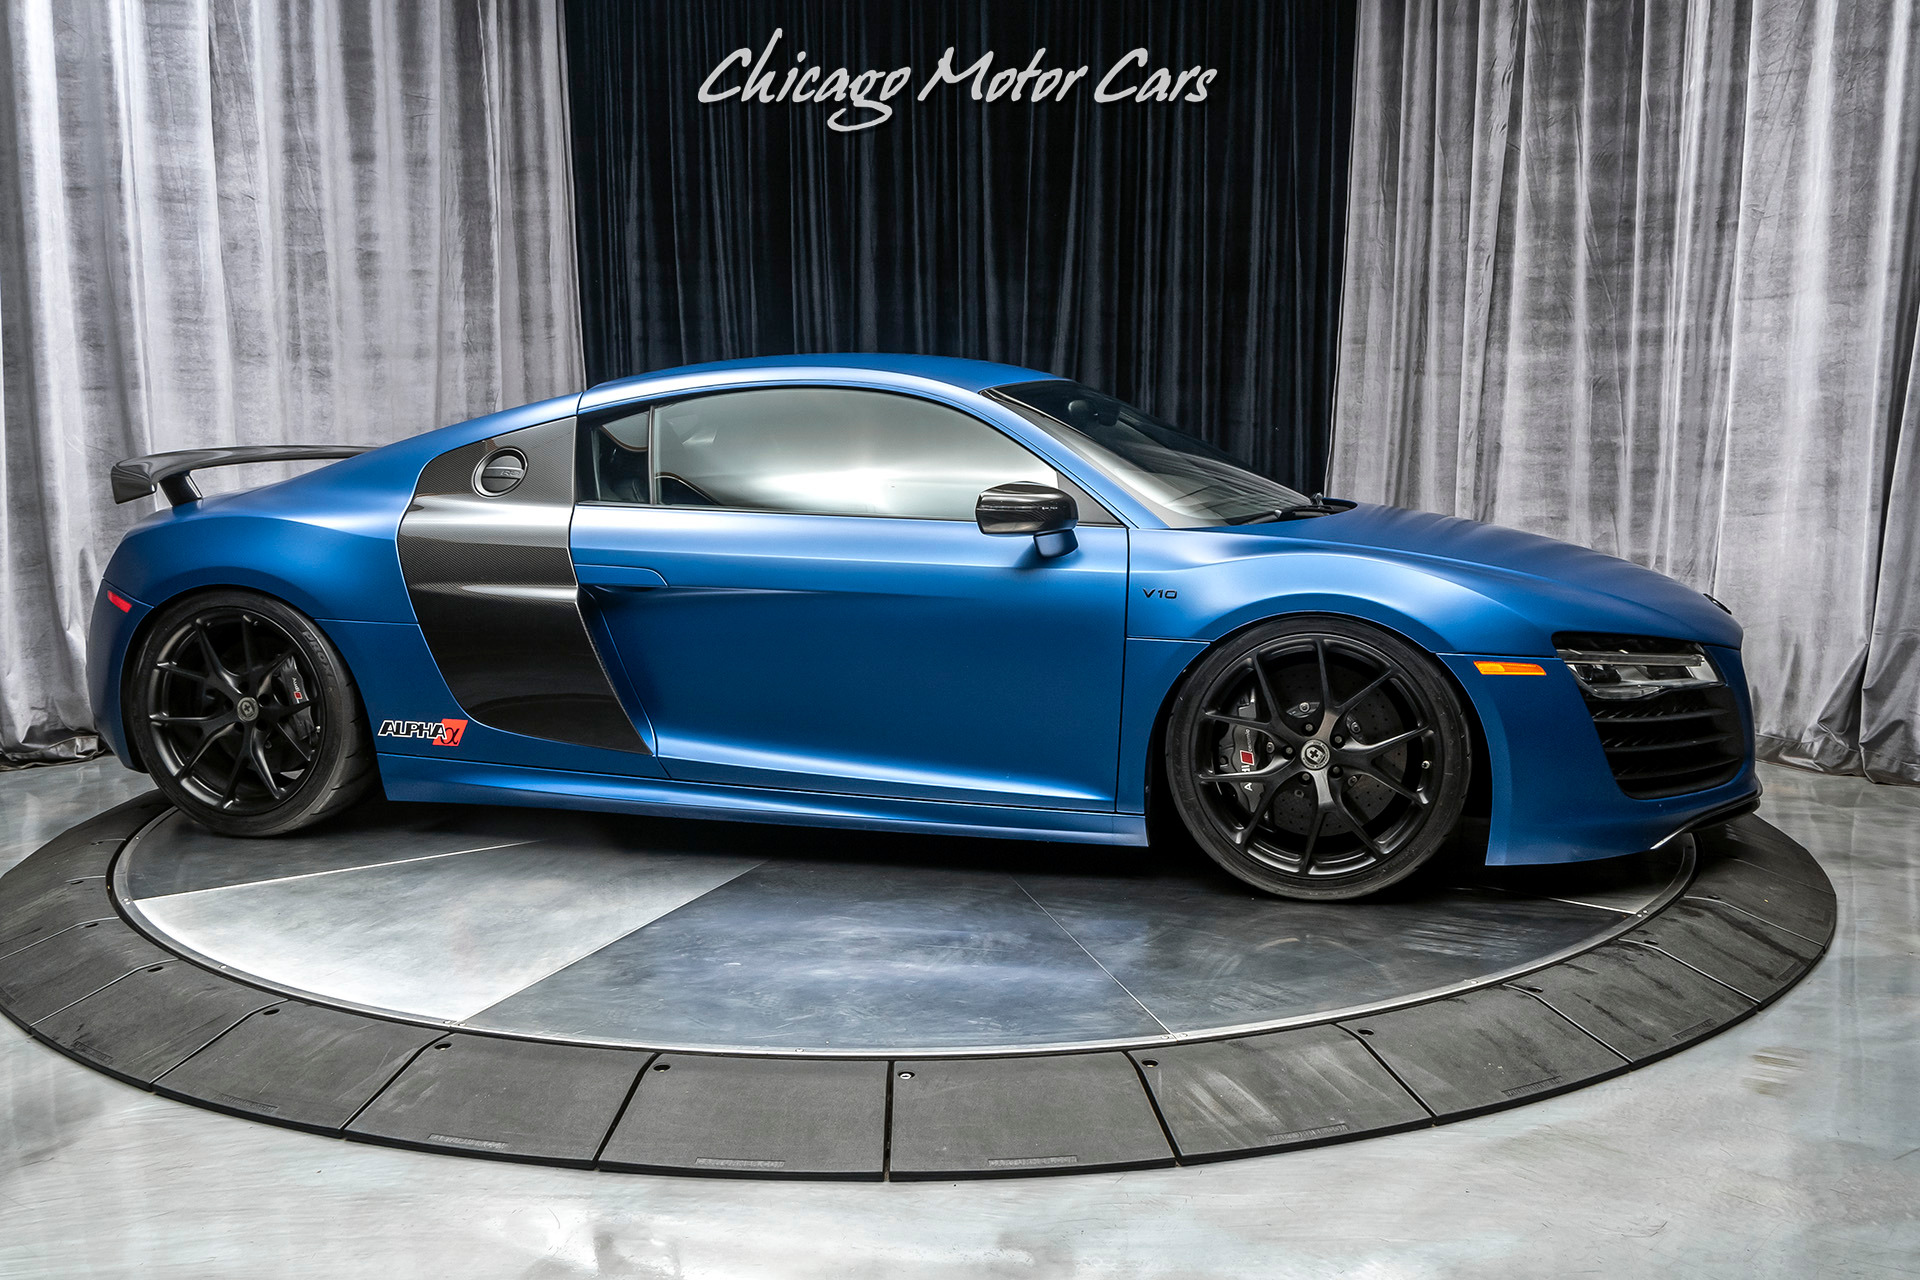 Used-2014-Audi-R8-V10-Plus-quattro-S-tronic-Coupe-1250-HP-AMS-TWIN-TURBO-BUILT